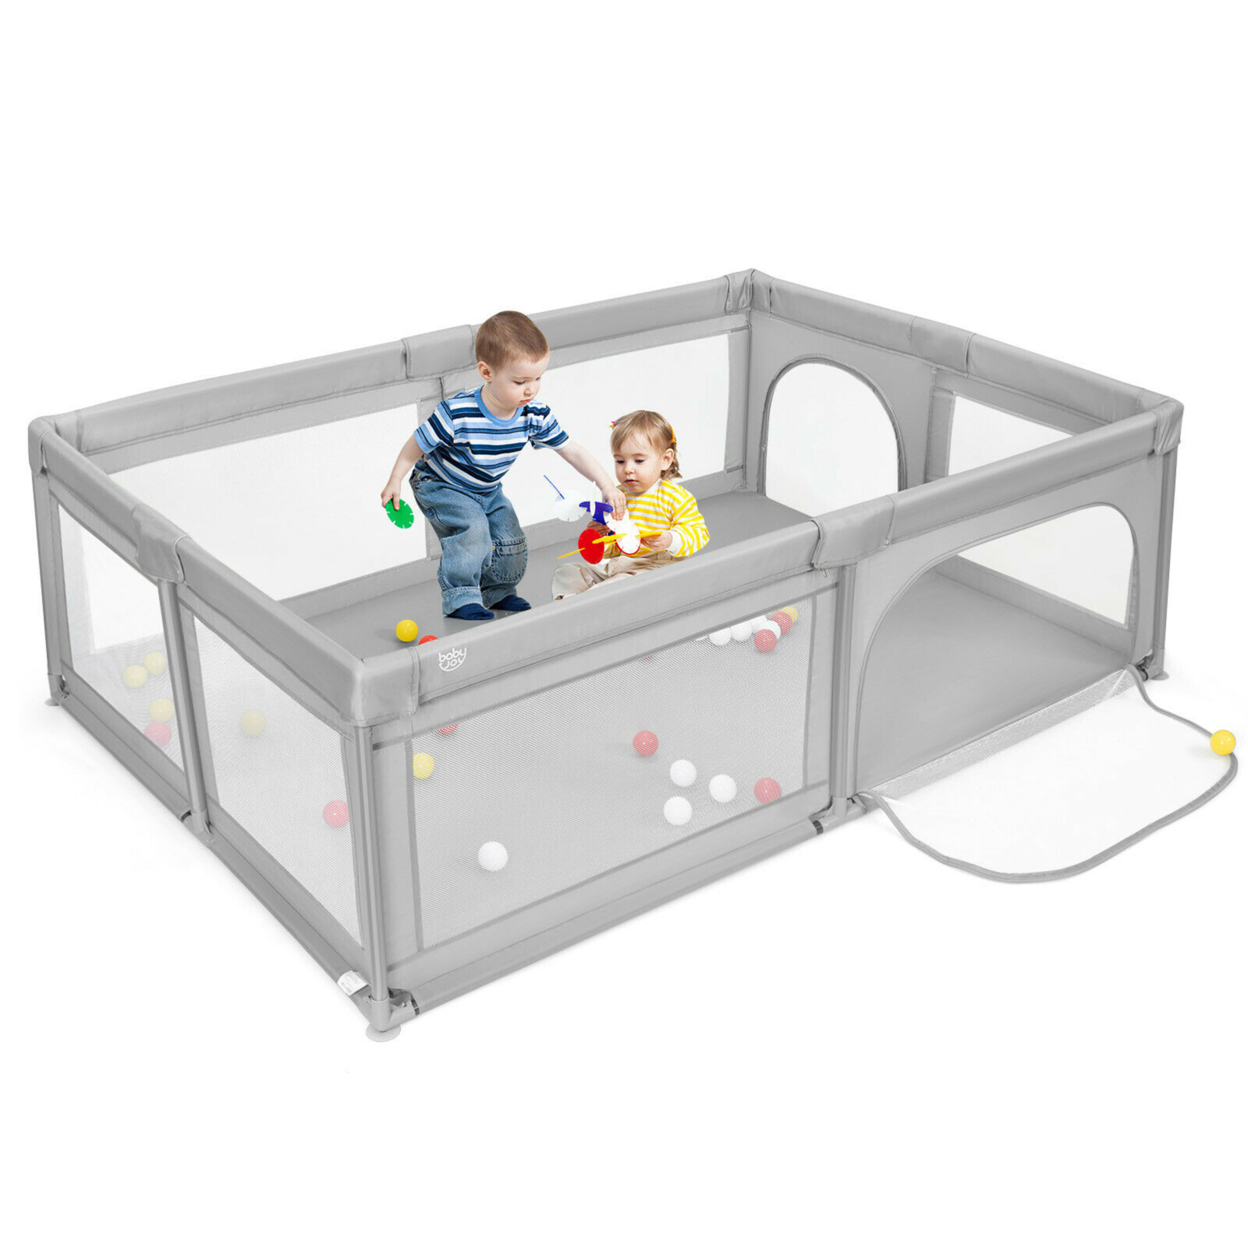 Gymax Baby Playpen Extra-Large Safety Baby Fence W/50 Ocean Balls - Gray